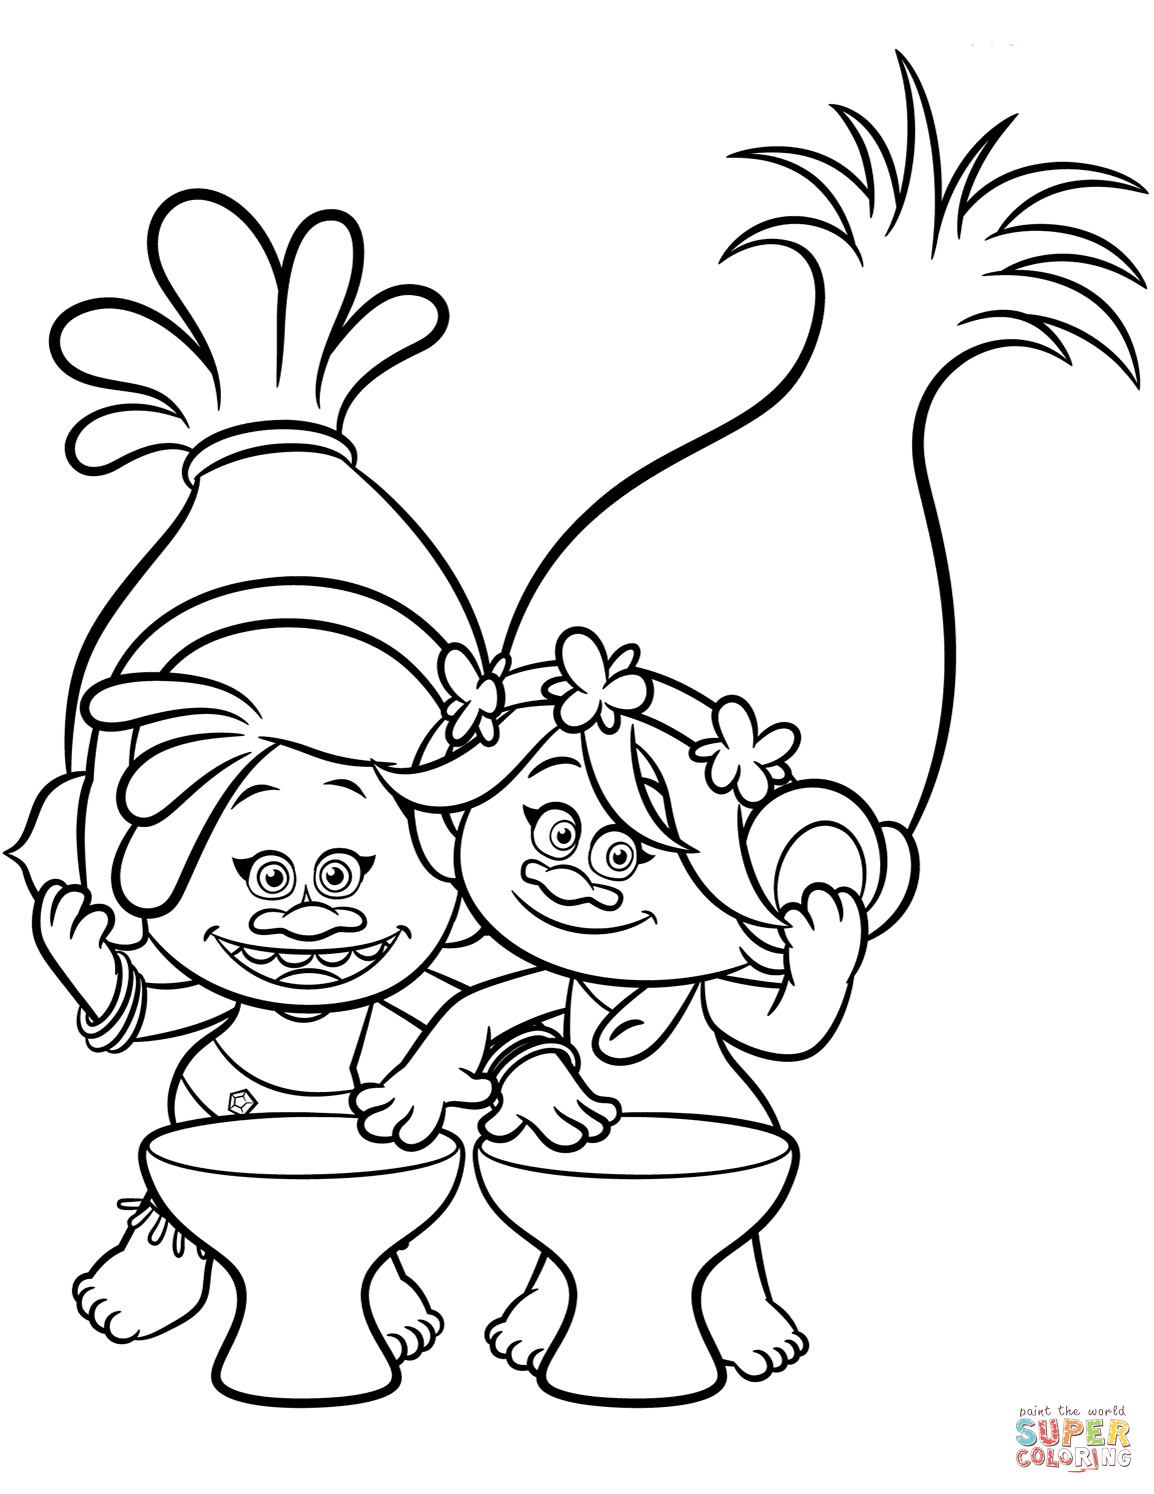 Trolls Movie Free Coloring Pages at GetDrawings | Free download